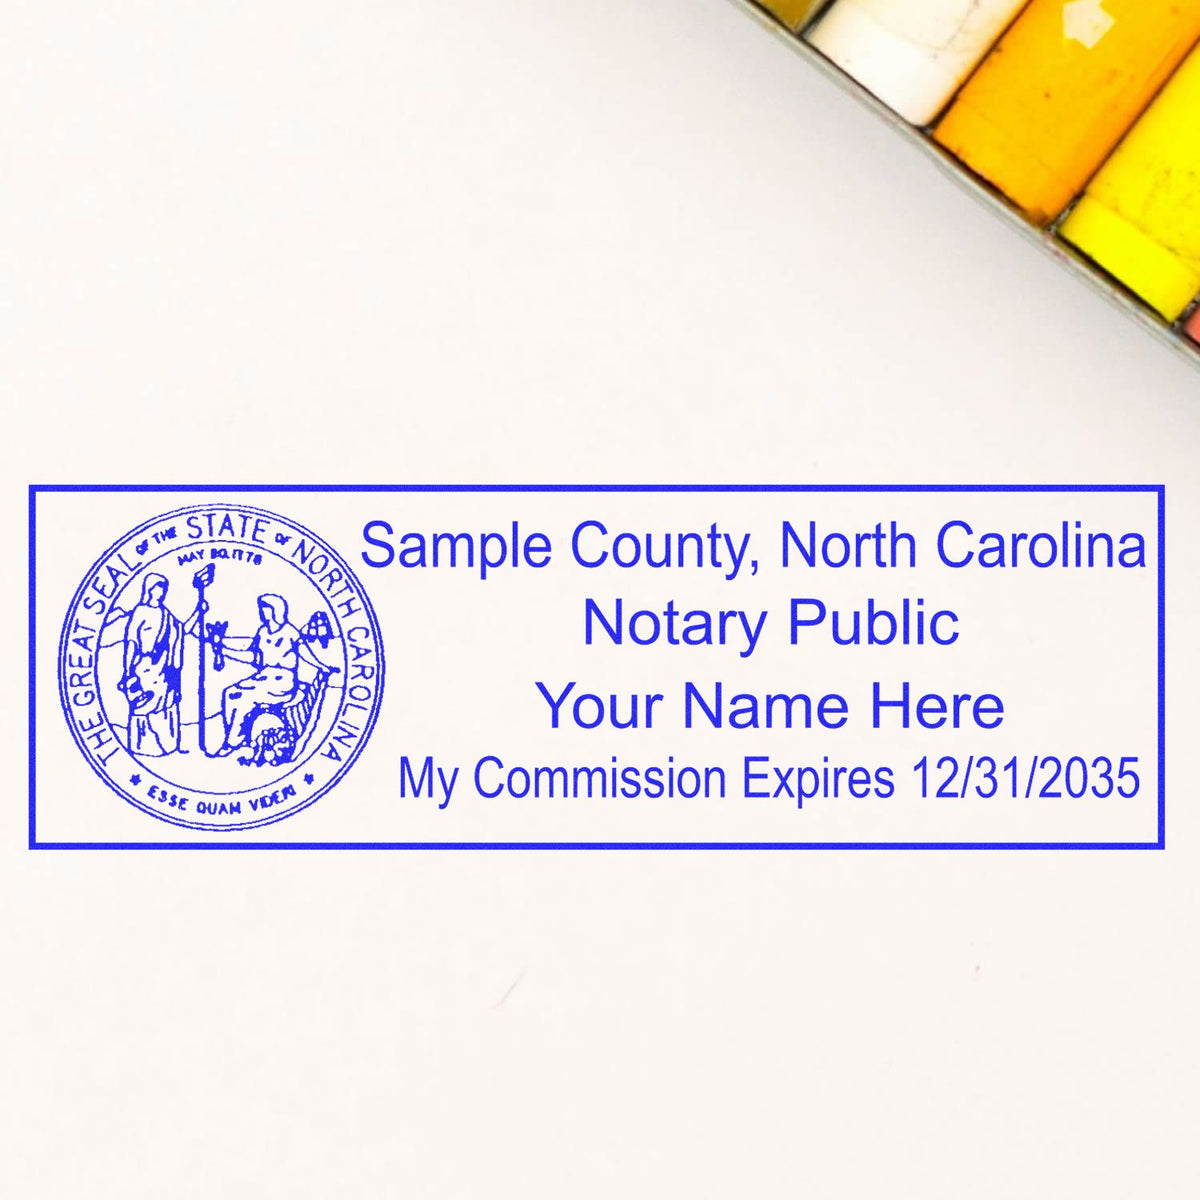 A photograph of the Heavy-Duty North Carolina Rectangular Notary Stamp stamp impression reveals a vivid, professional image of the on paper.